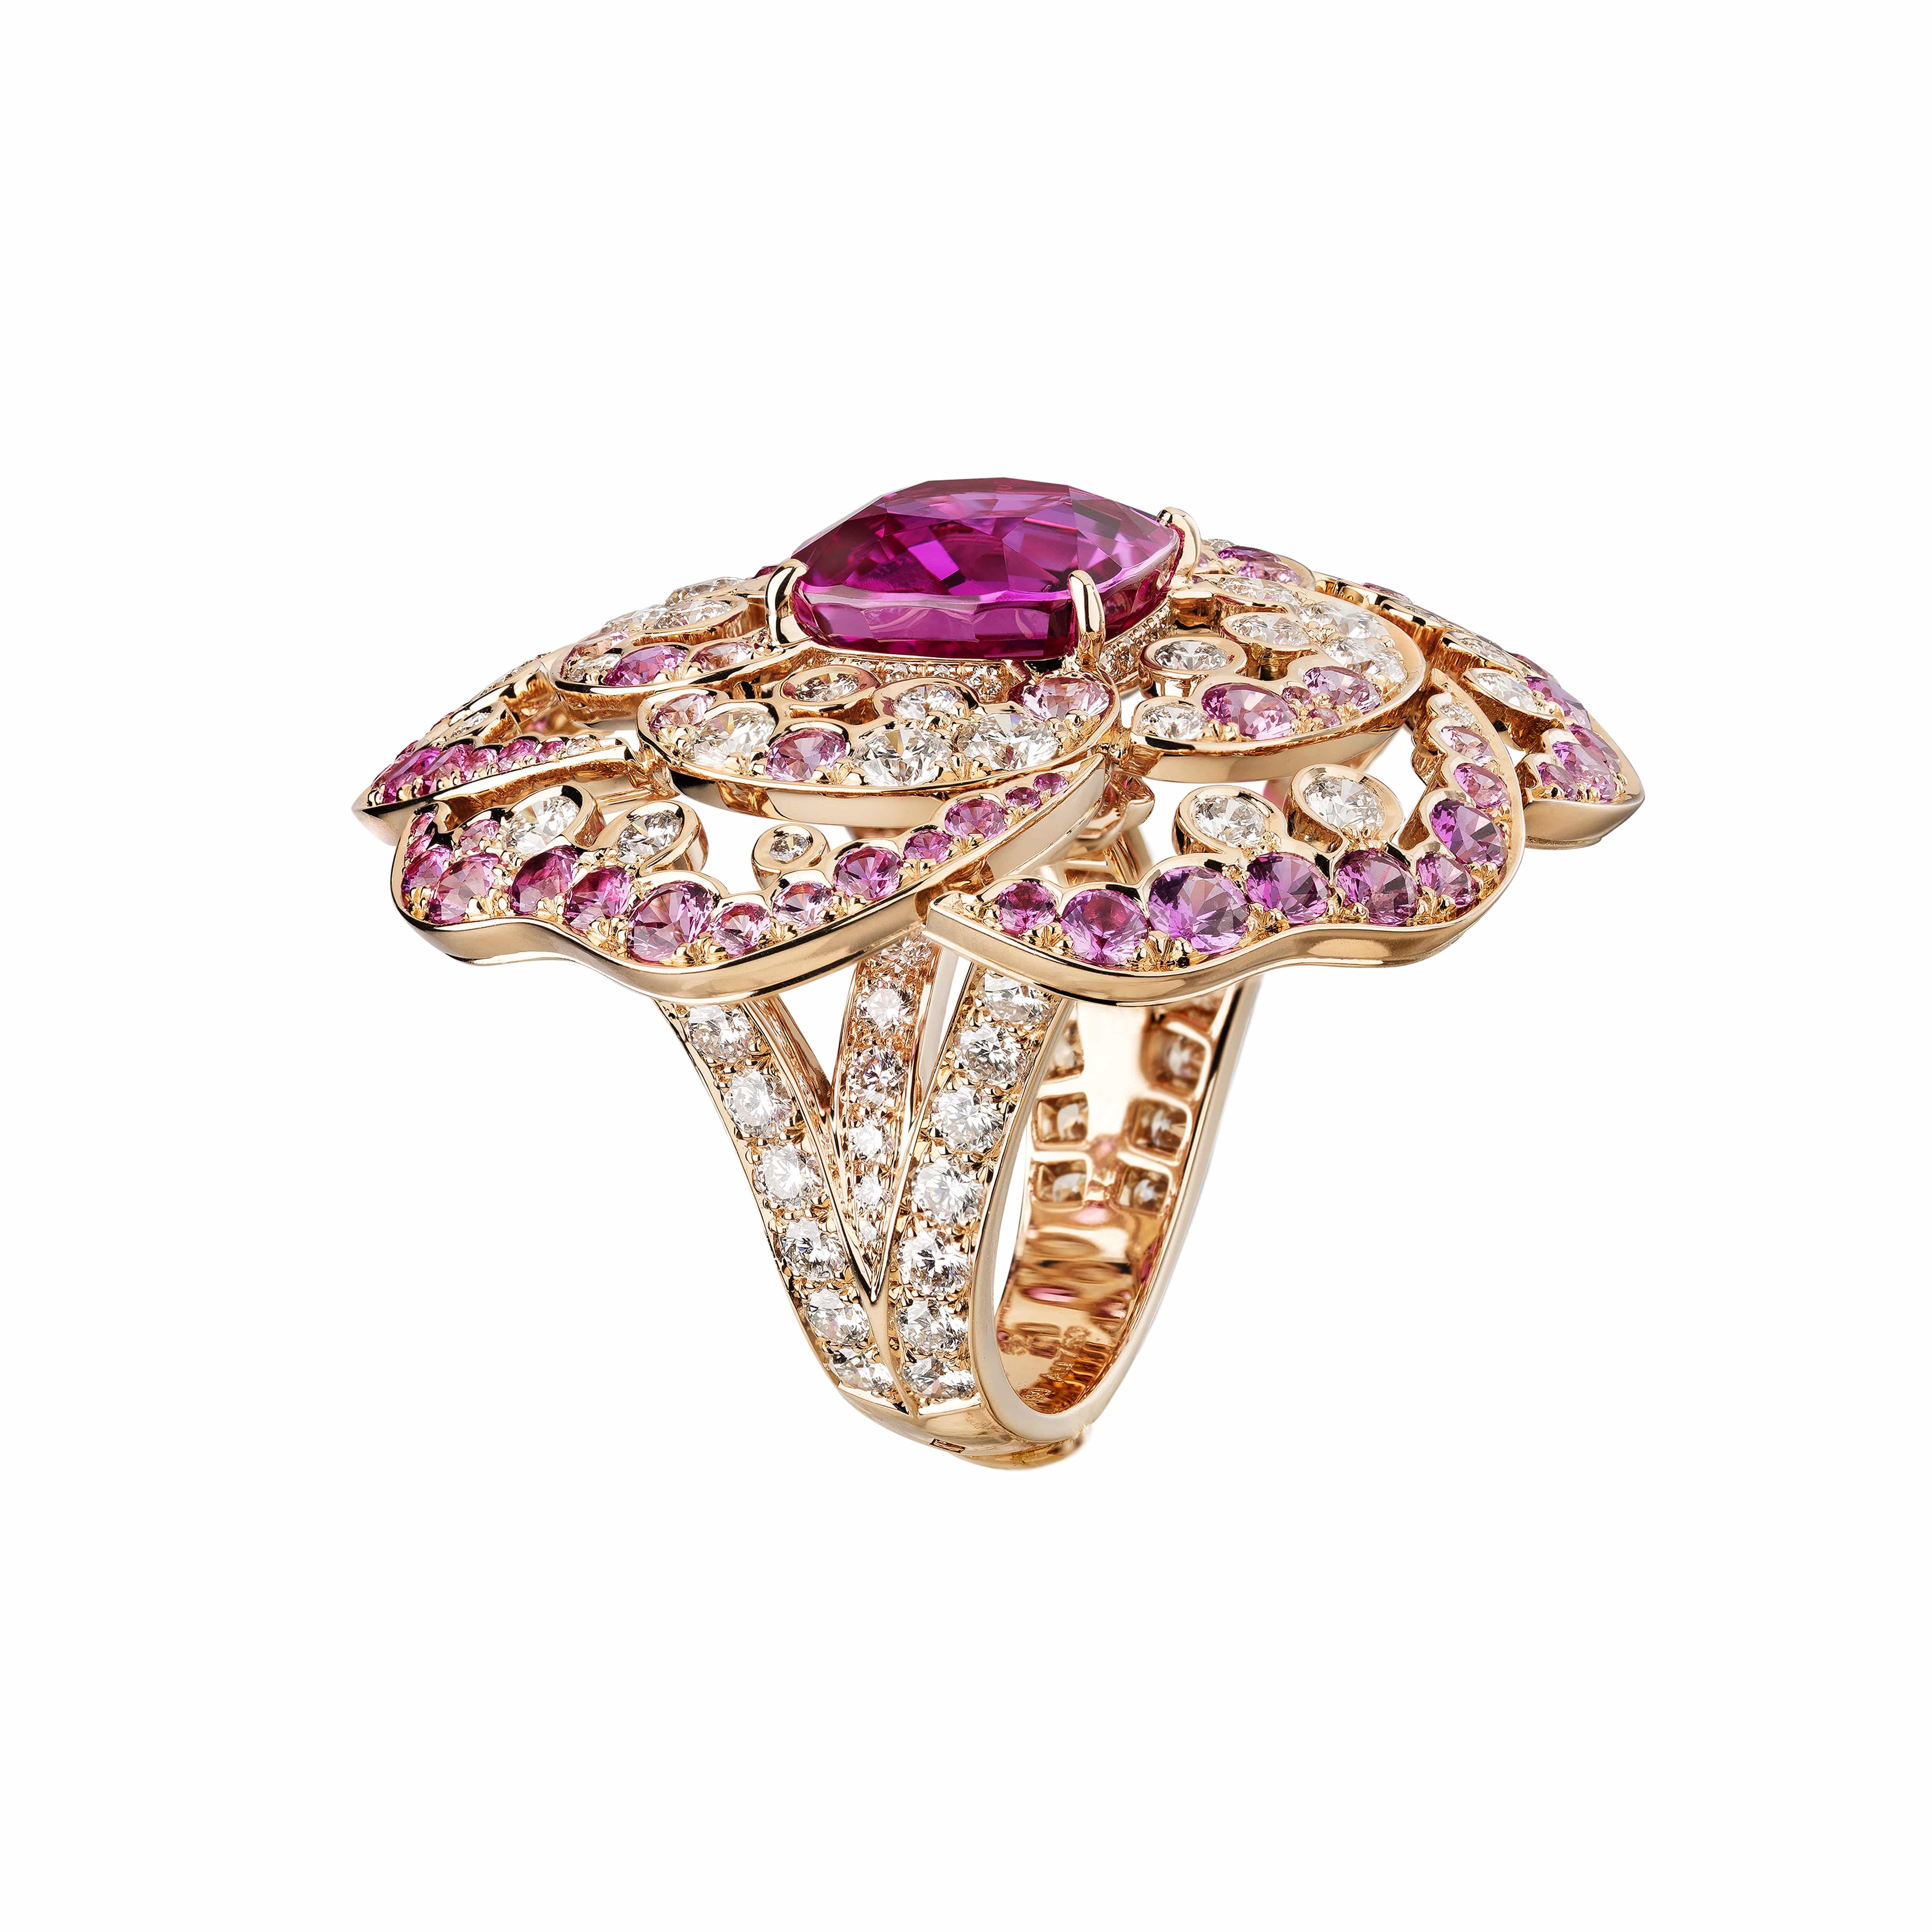 Chanel high jewellery Ruban ring in white gold with diamonds